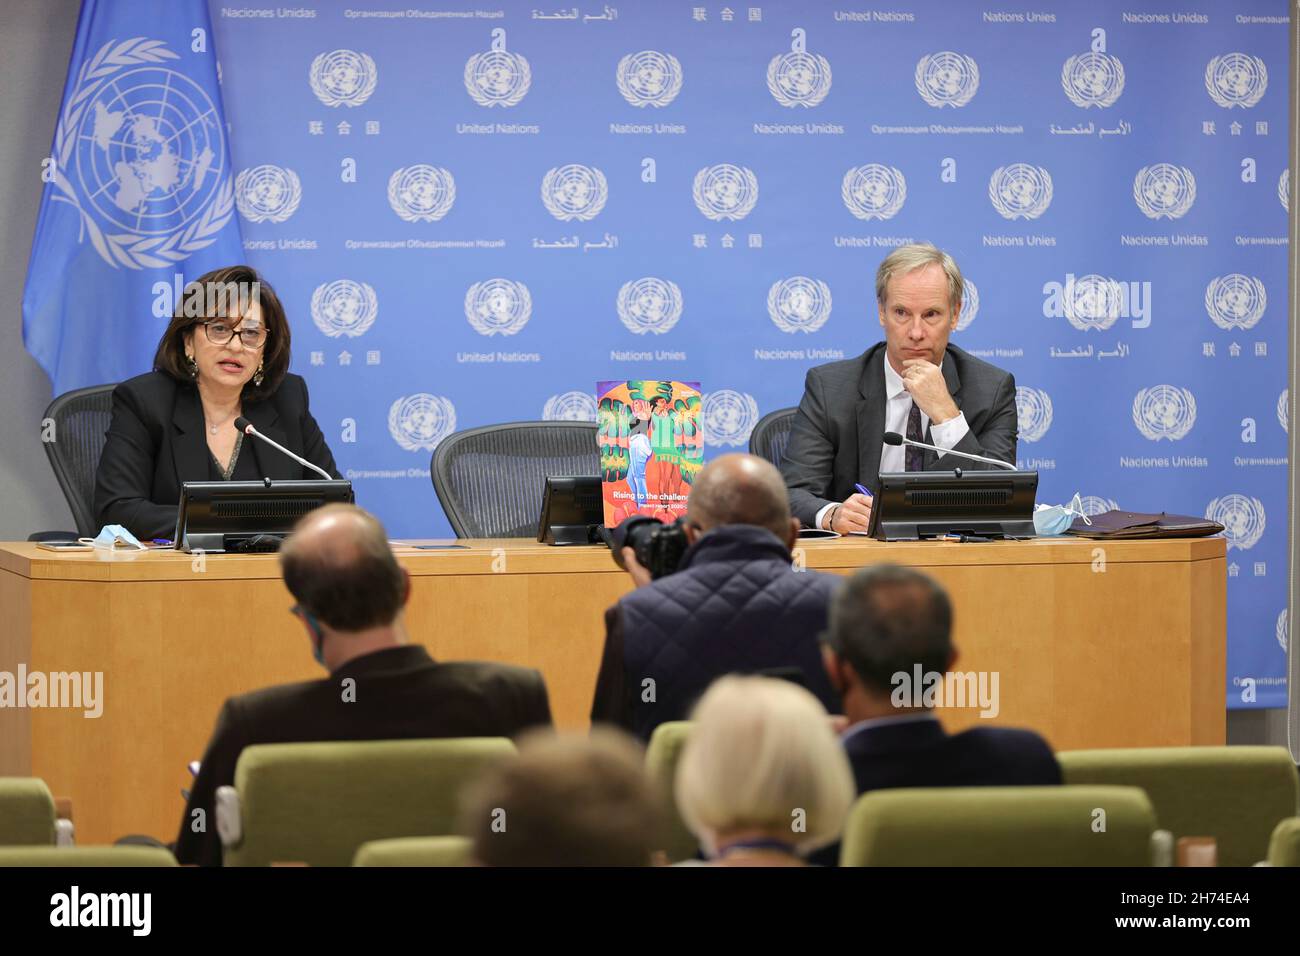 United Nations, New York, USA, November 19, 2021 - Sima Sami Bahous, Executive Director of UN Women, and Olof Skoog, Head of the Delegation of the European Union to the During a press conference on the launch of the Spotlight Initiatives impact report for 2020-2021, Rising to the challenge is held at UN Headquarters Today in New York City. Photo: Luiz Rampelotto/EuropaNewswire PHOTO CREDIT MANDATORY. Stock Photo